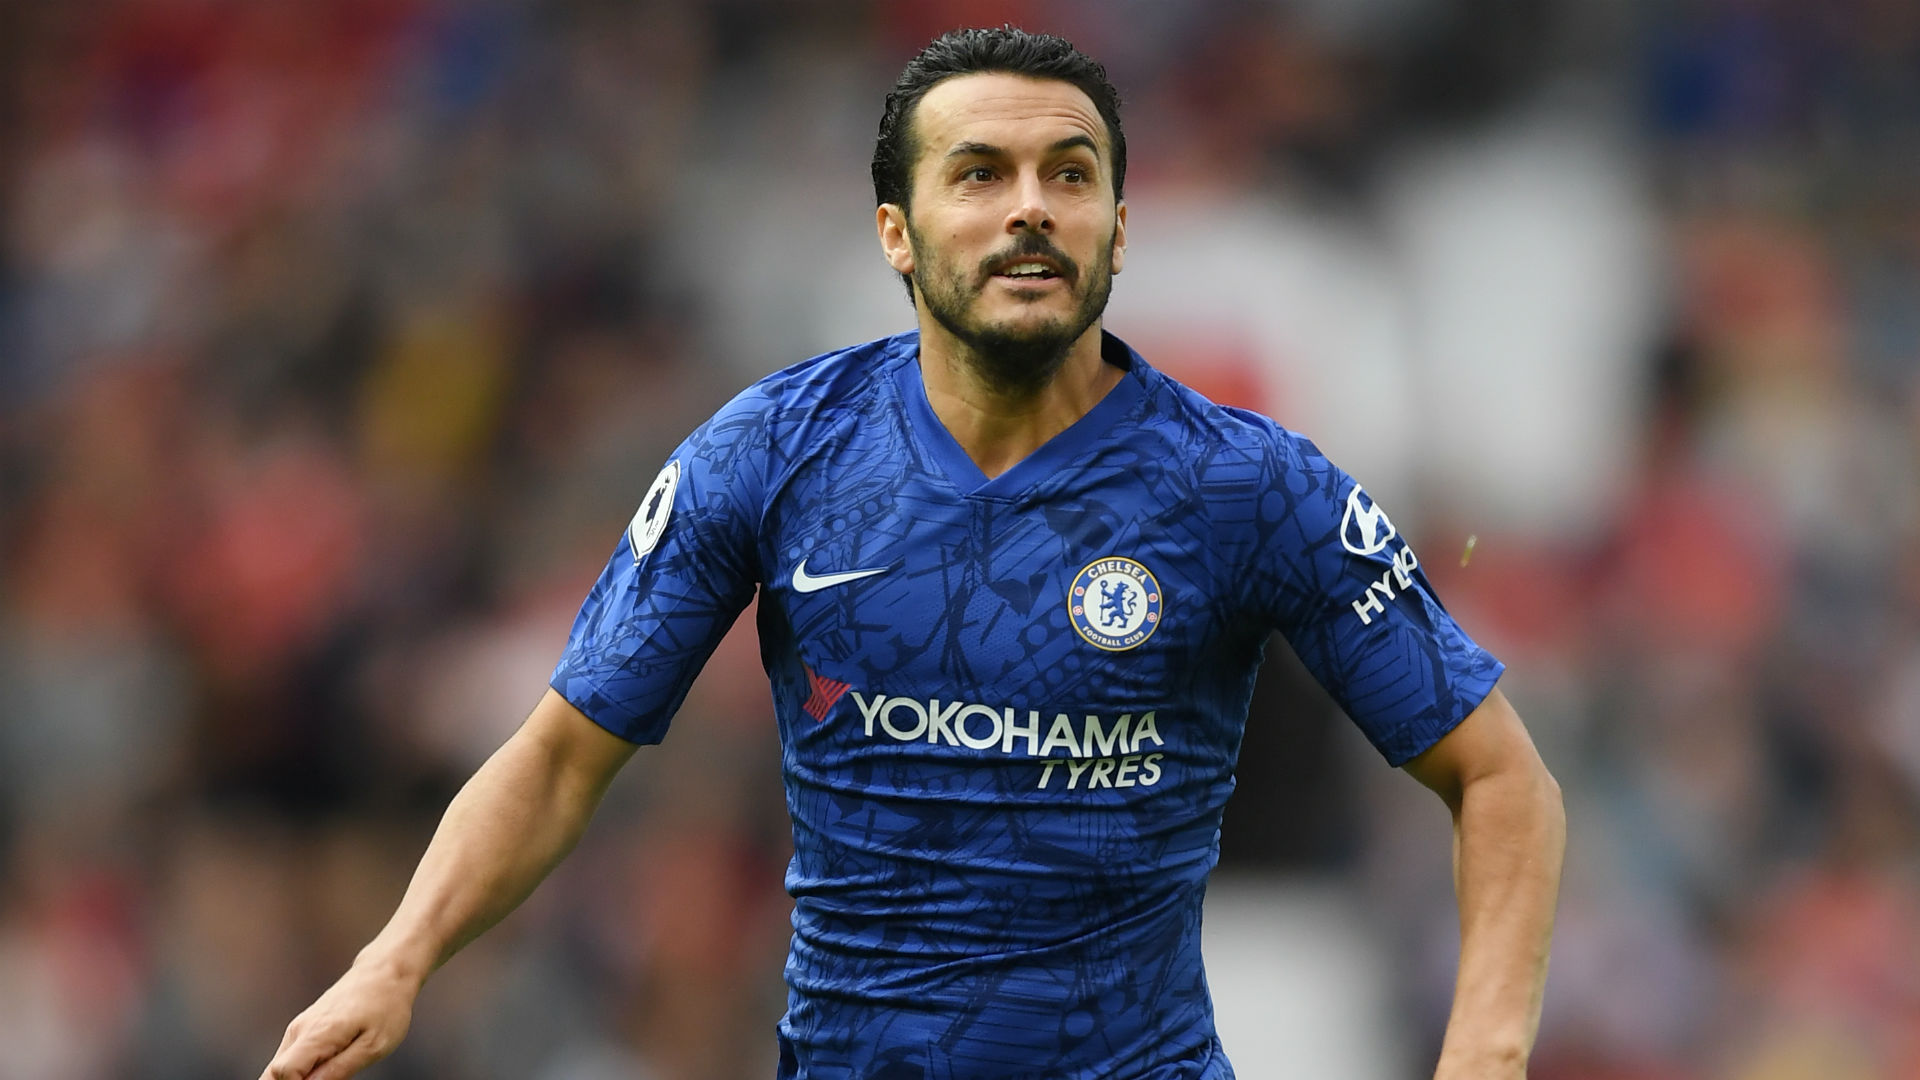 Pedro has offers to end ‘hard’ Chelsea spell as World Cup winner heads towards free agency